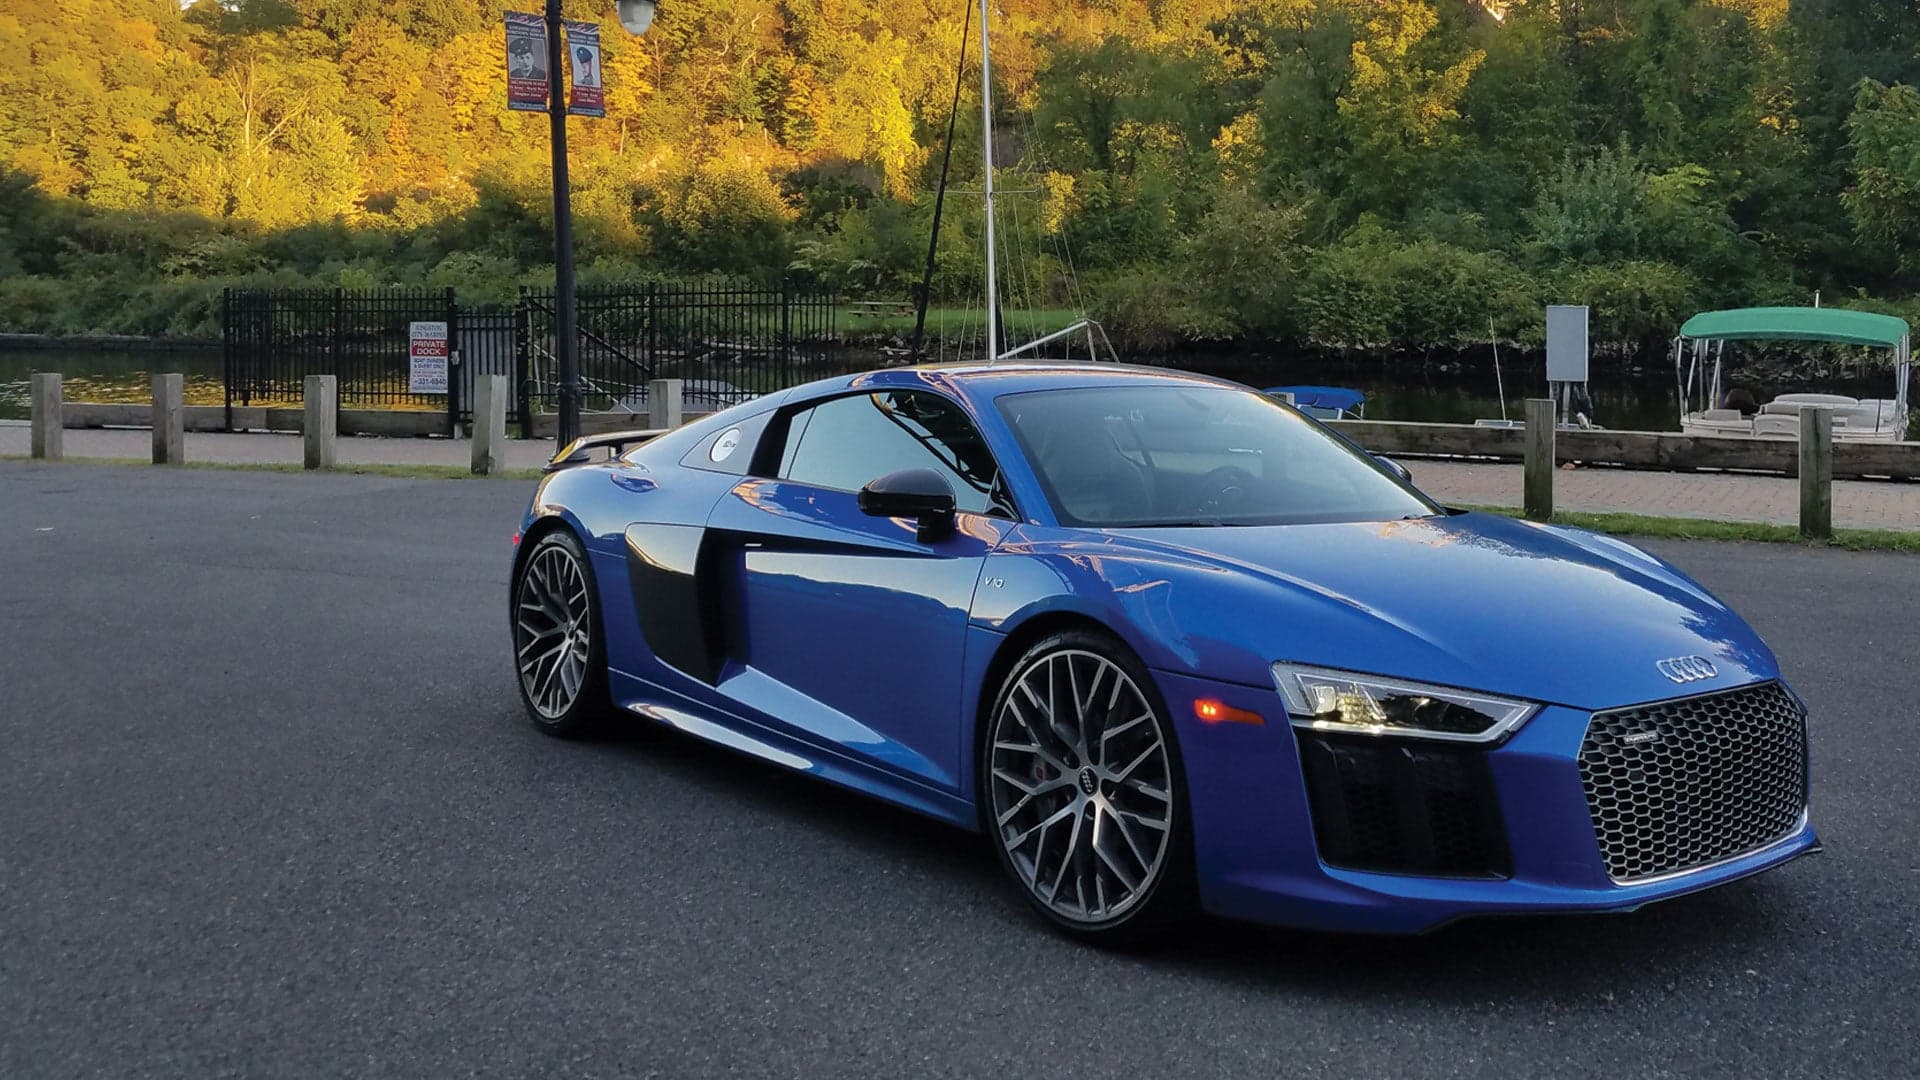 Audi R8 Is the True Everyday Supercar